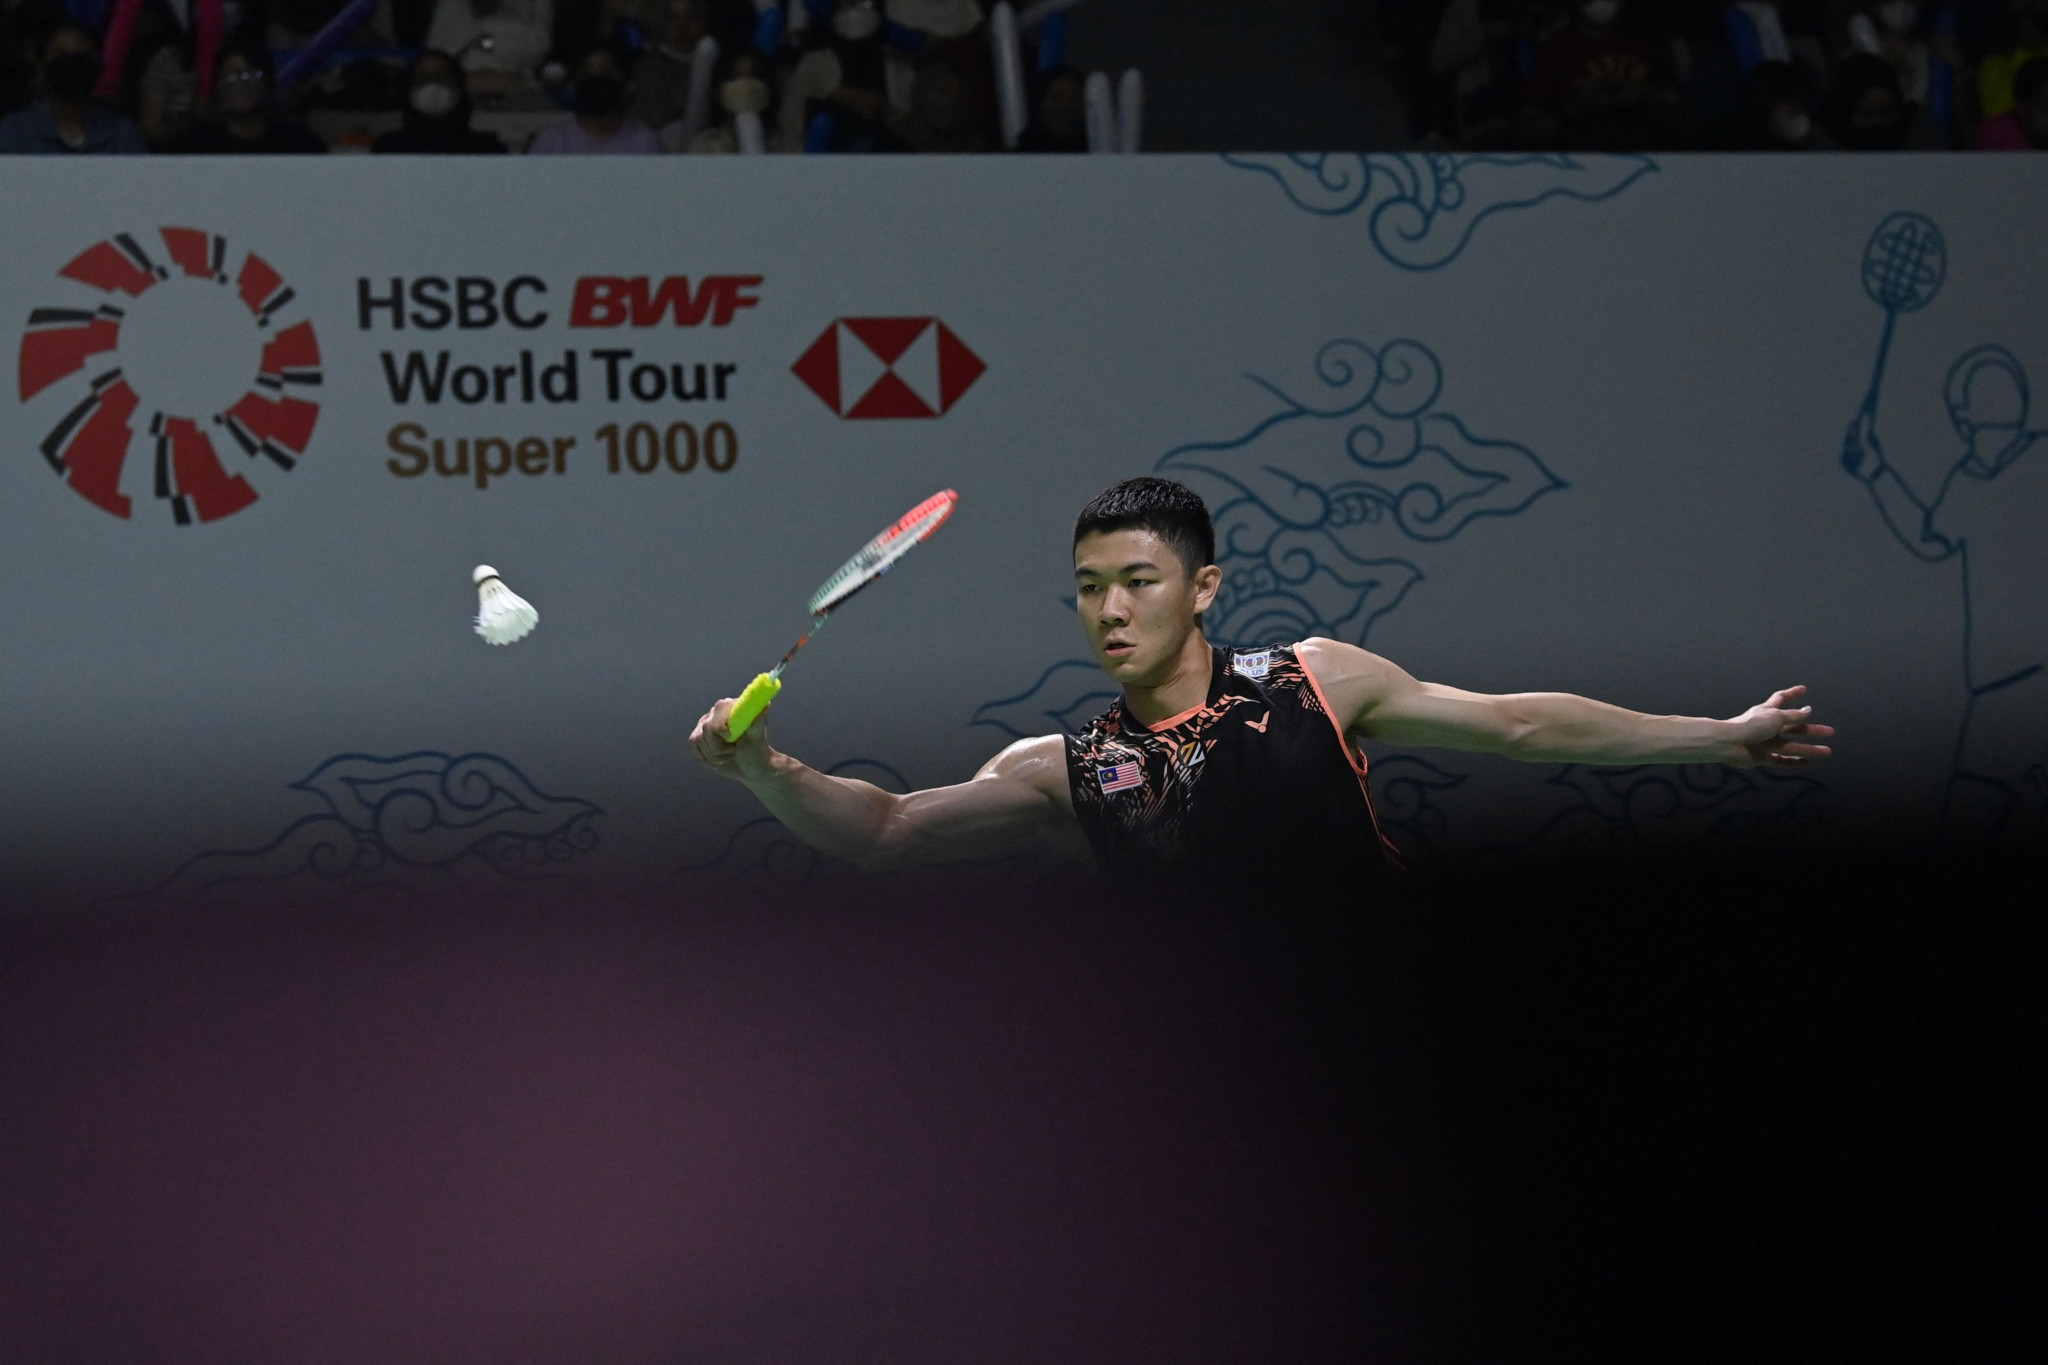 Malaysia is to have its own Super 1000 event following the BWF World Tour announcement ©Getty Images